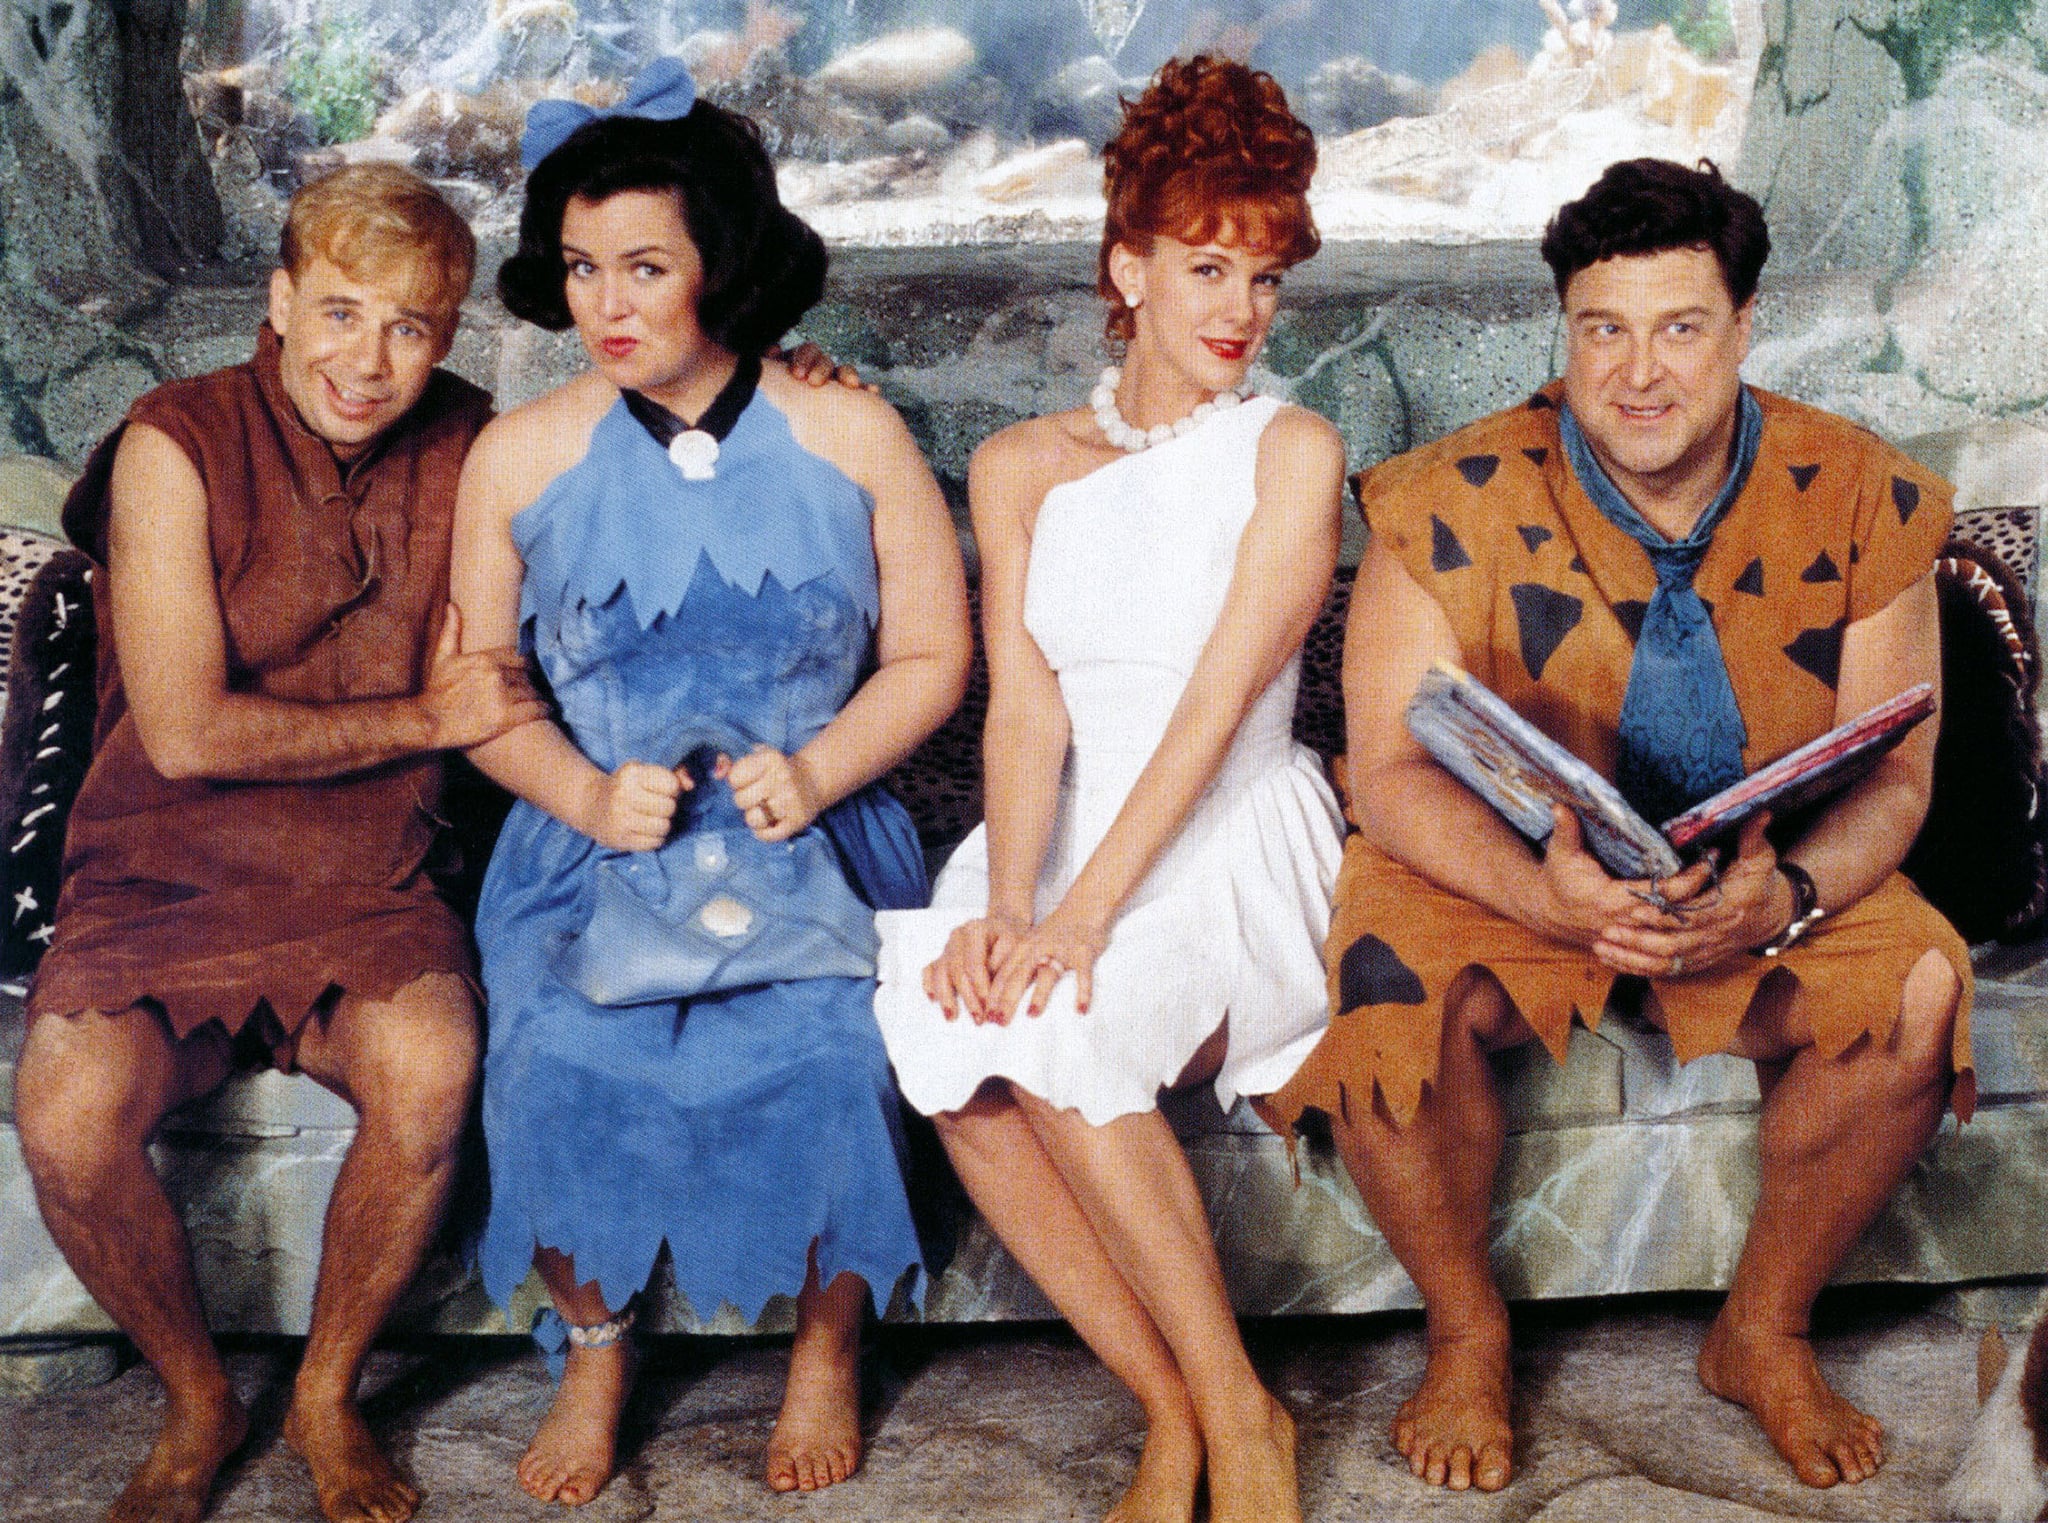 The Flintstones Is Coming to Netflix in April, and We're Feeling Crazy...